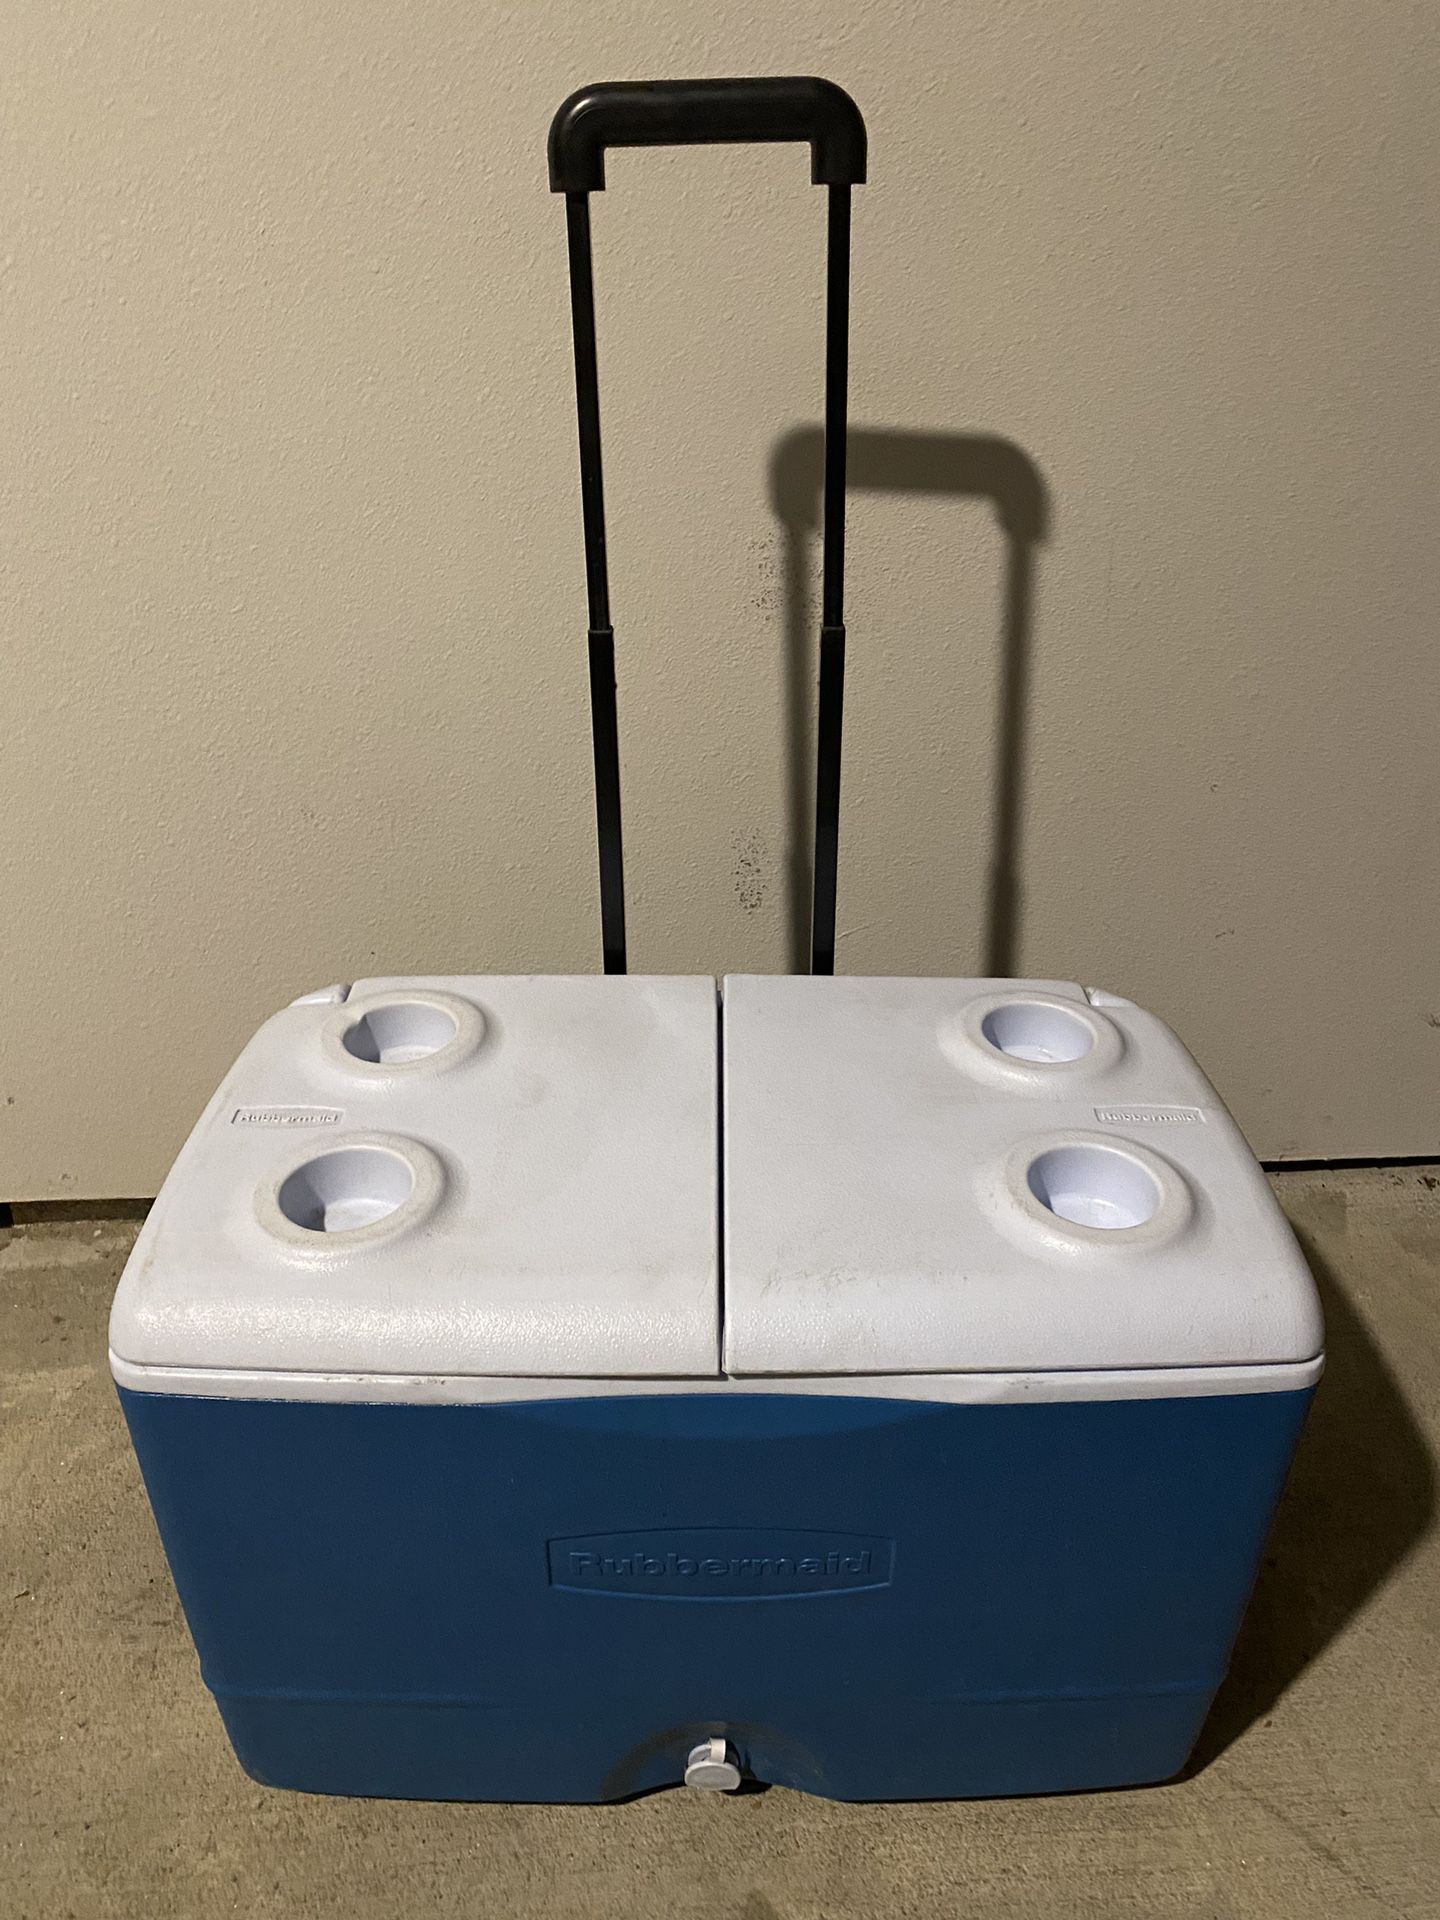 Rubbermaid Ice Chest On Wheels!